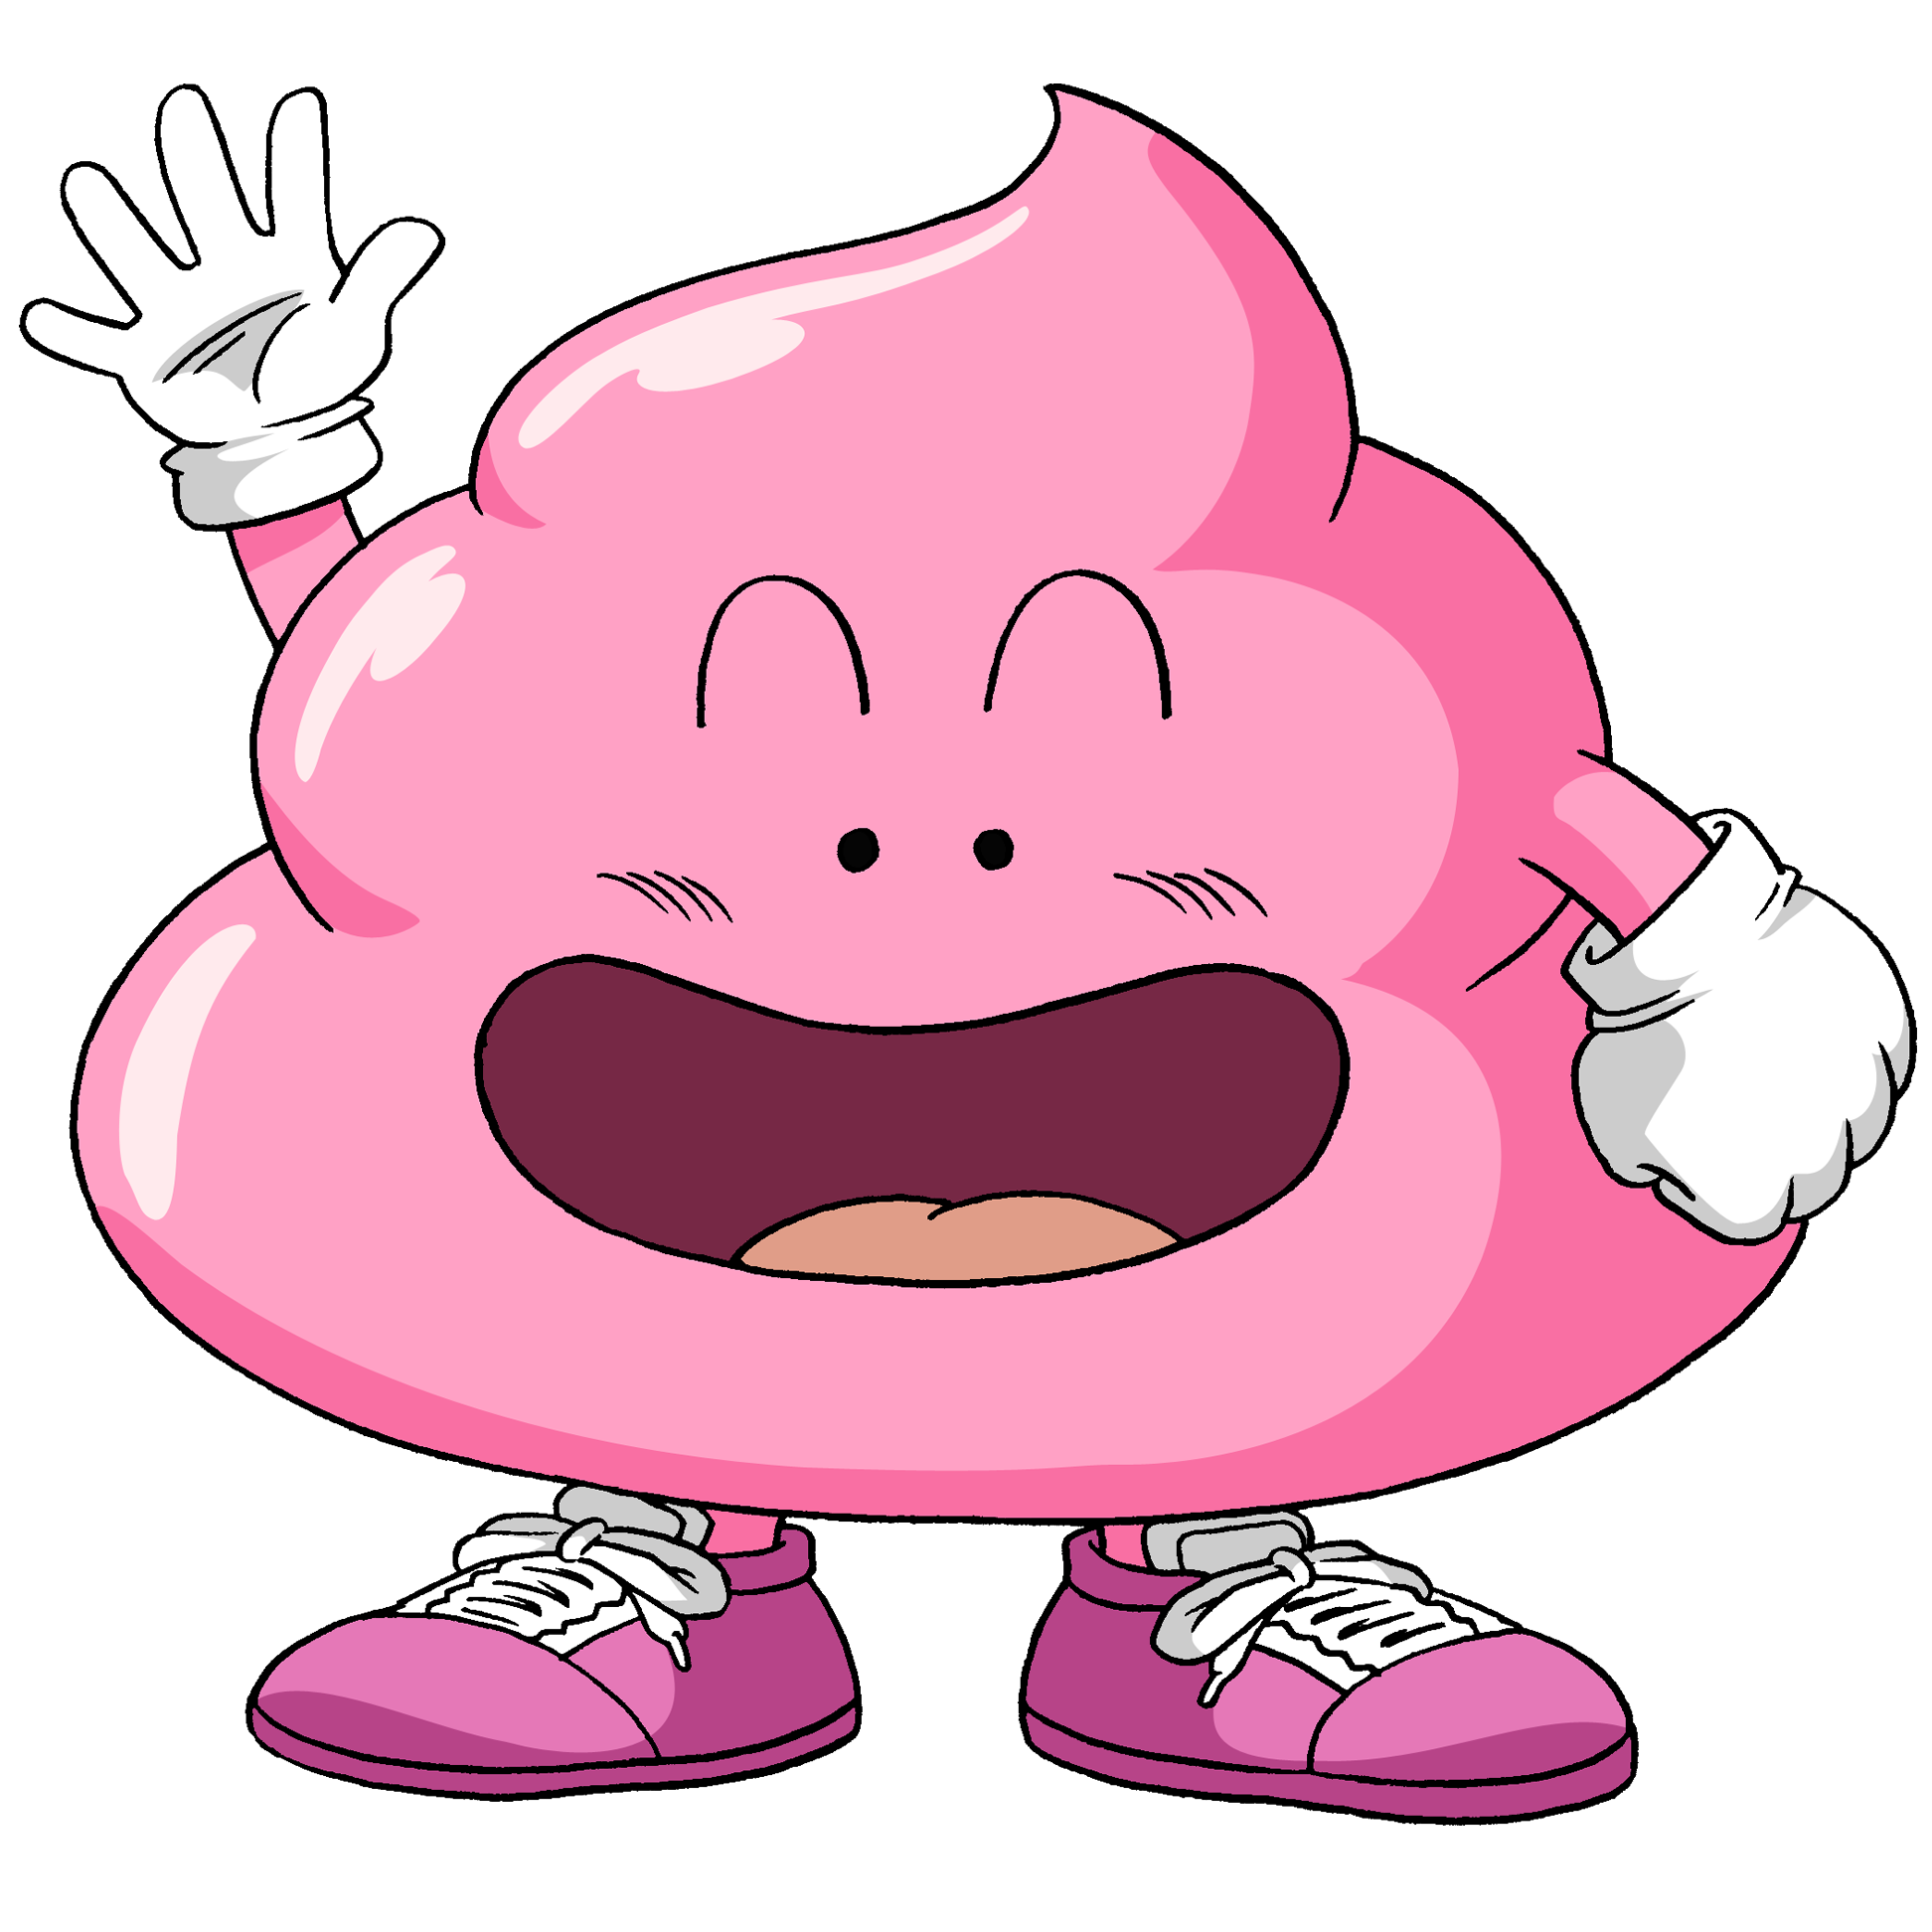 personnage anime - UNCHI (Poop Boy) - Le caca